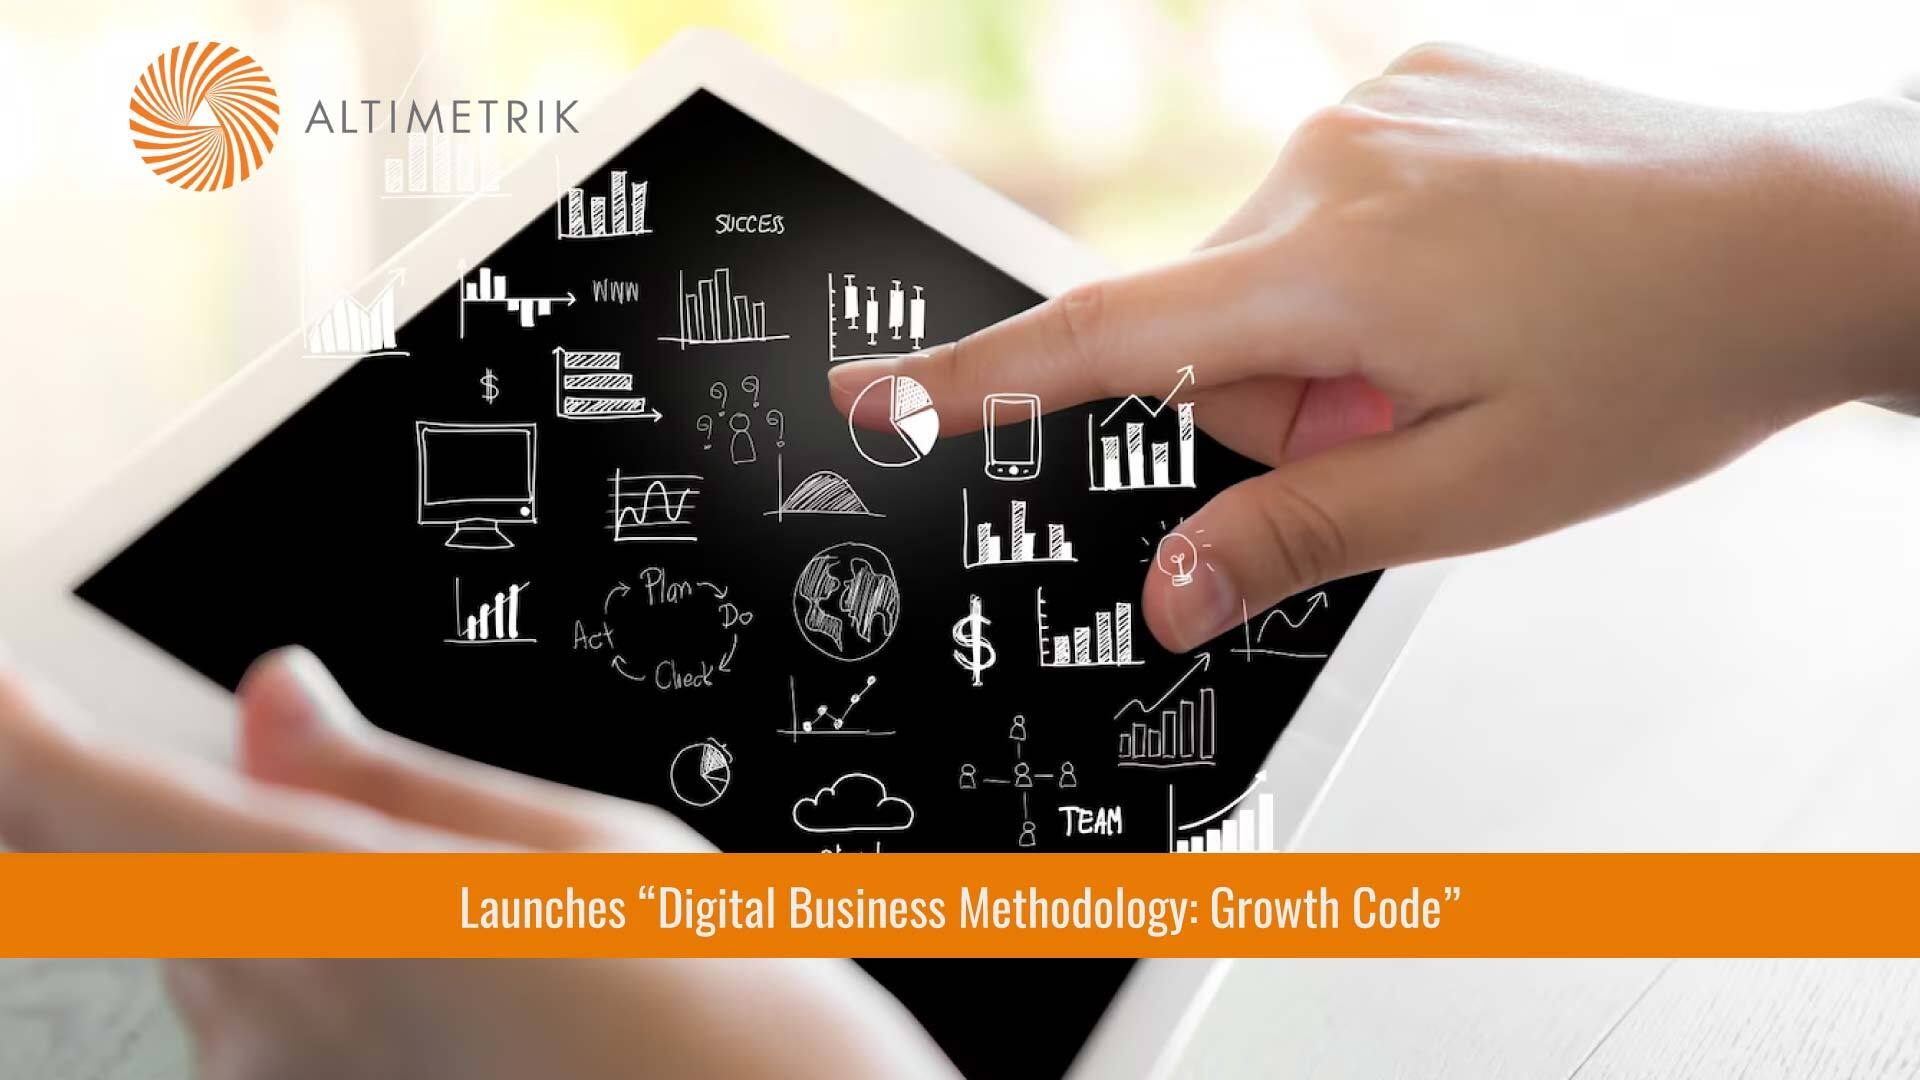 Altimetrik Launches “Digital Business Methodology: Growth Code” — a Book to Accelerate Business Growth